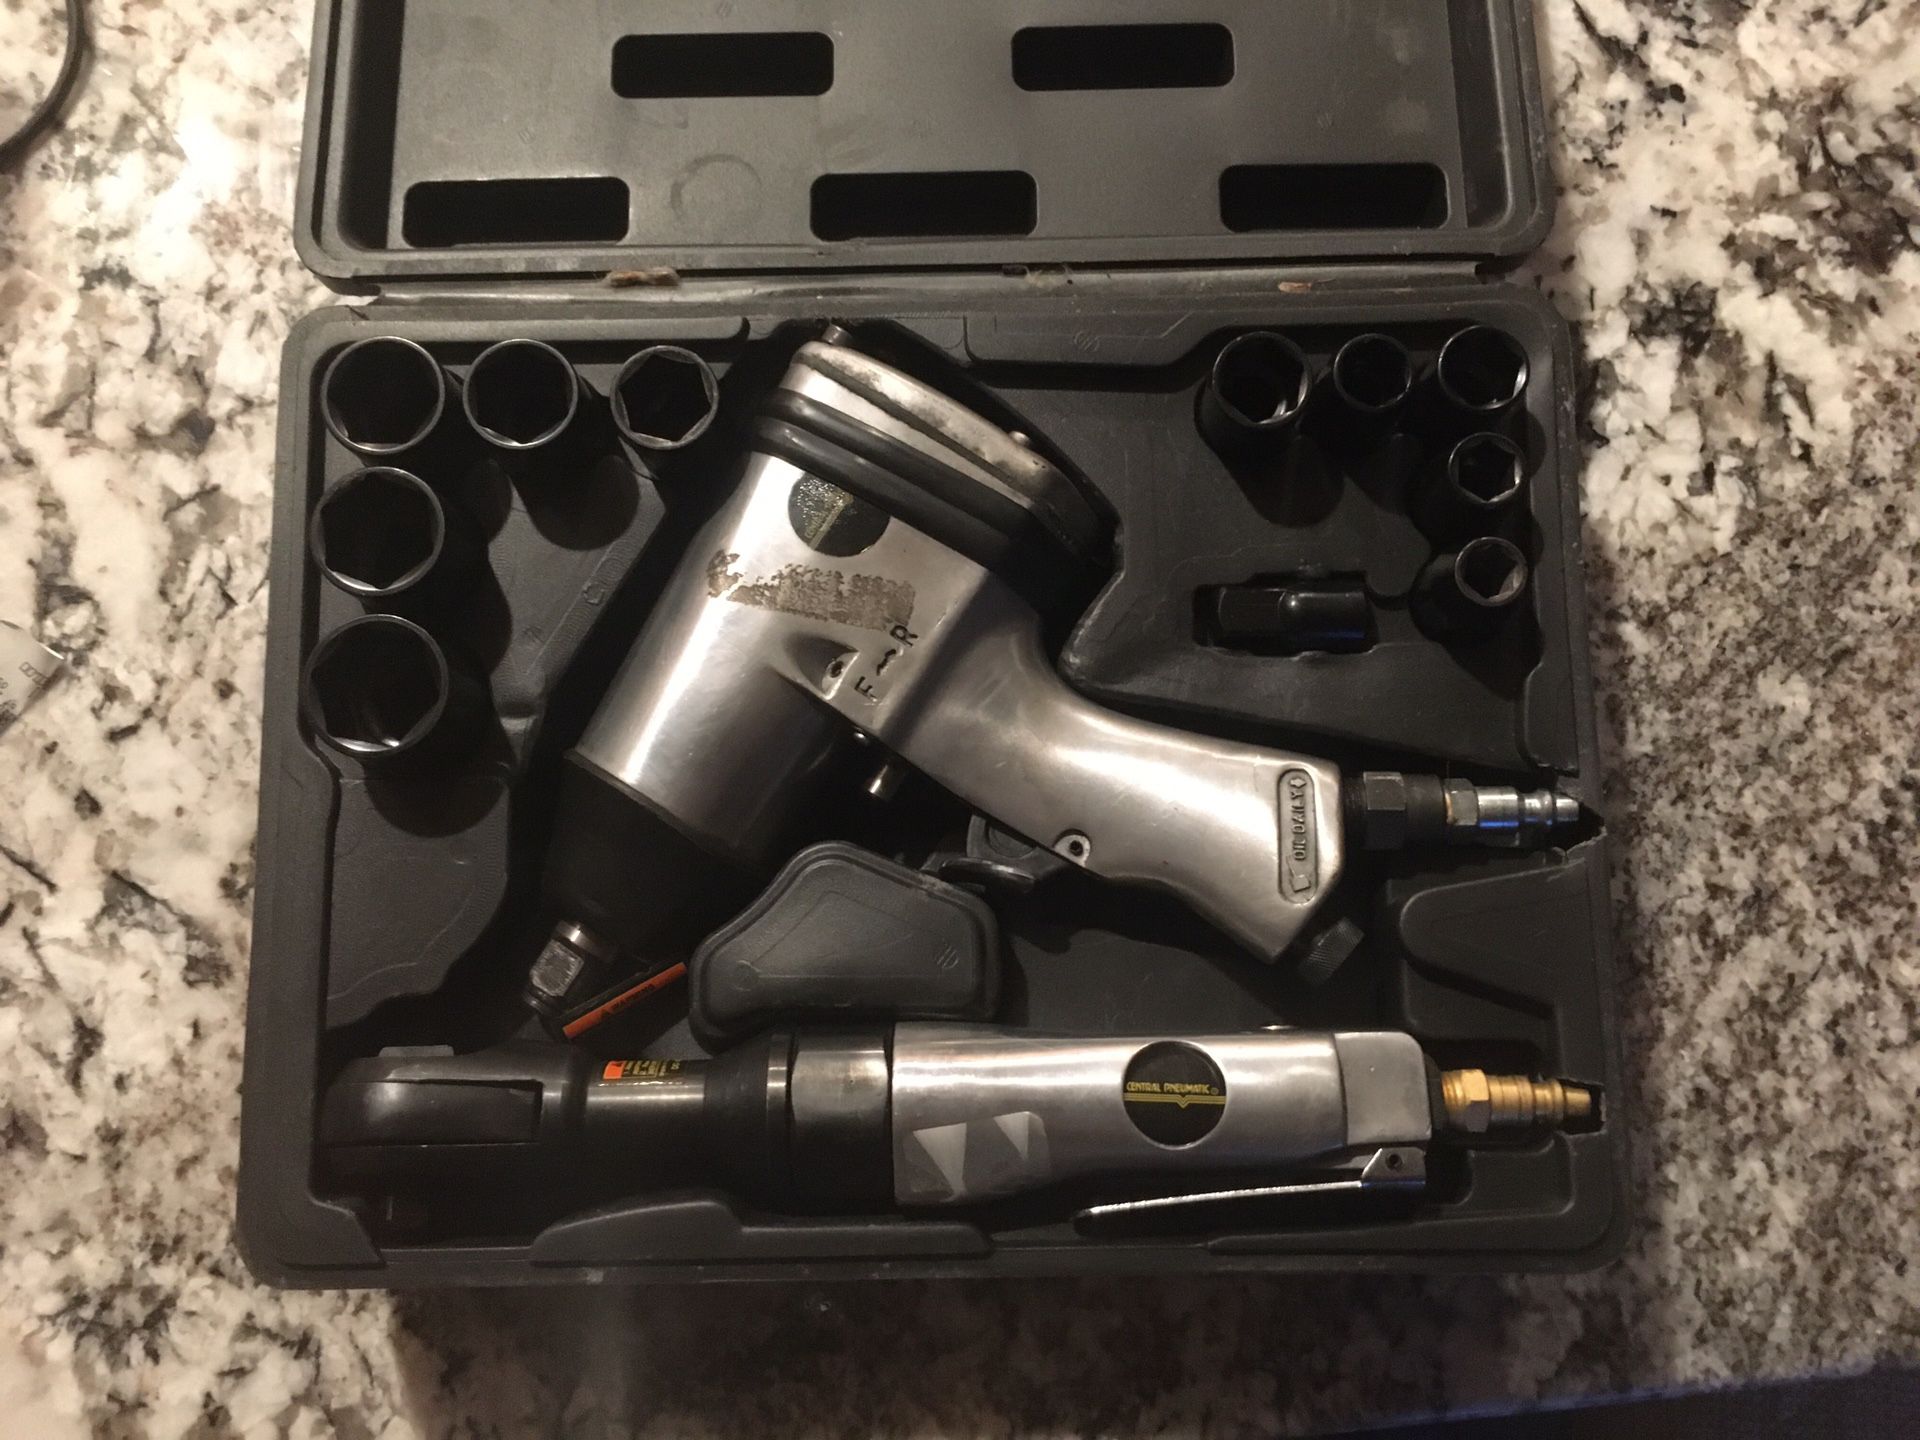  impact wrench and ratchet With Sockets